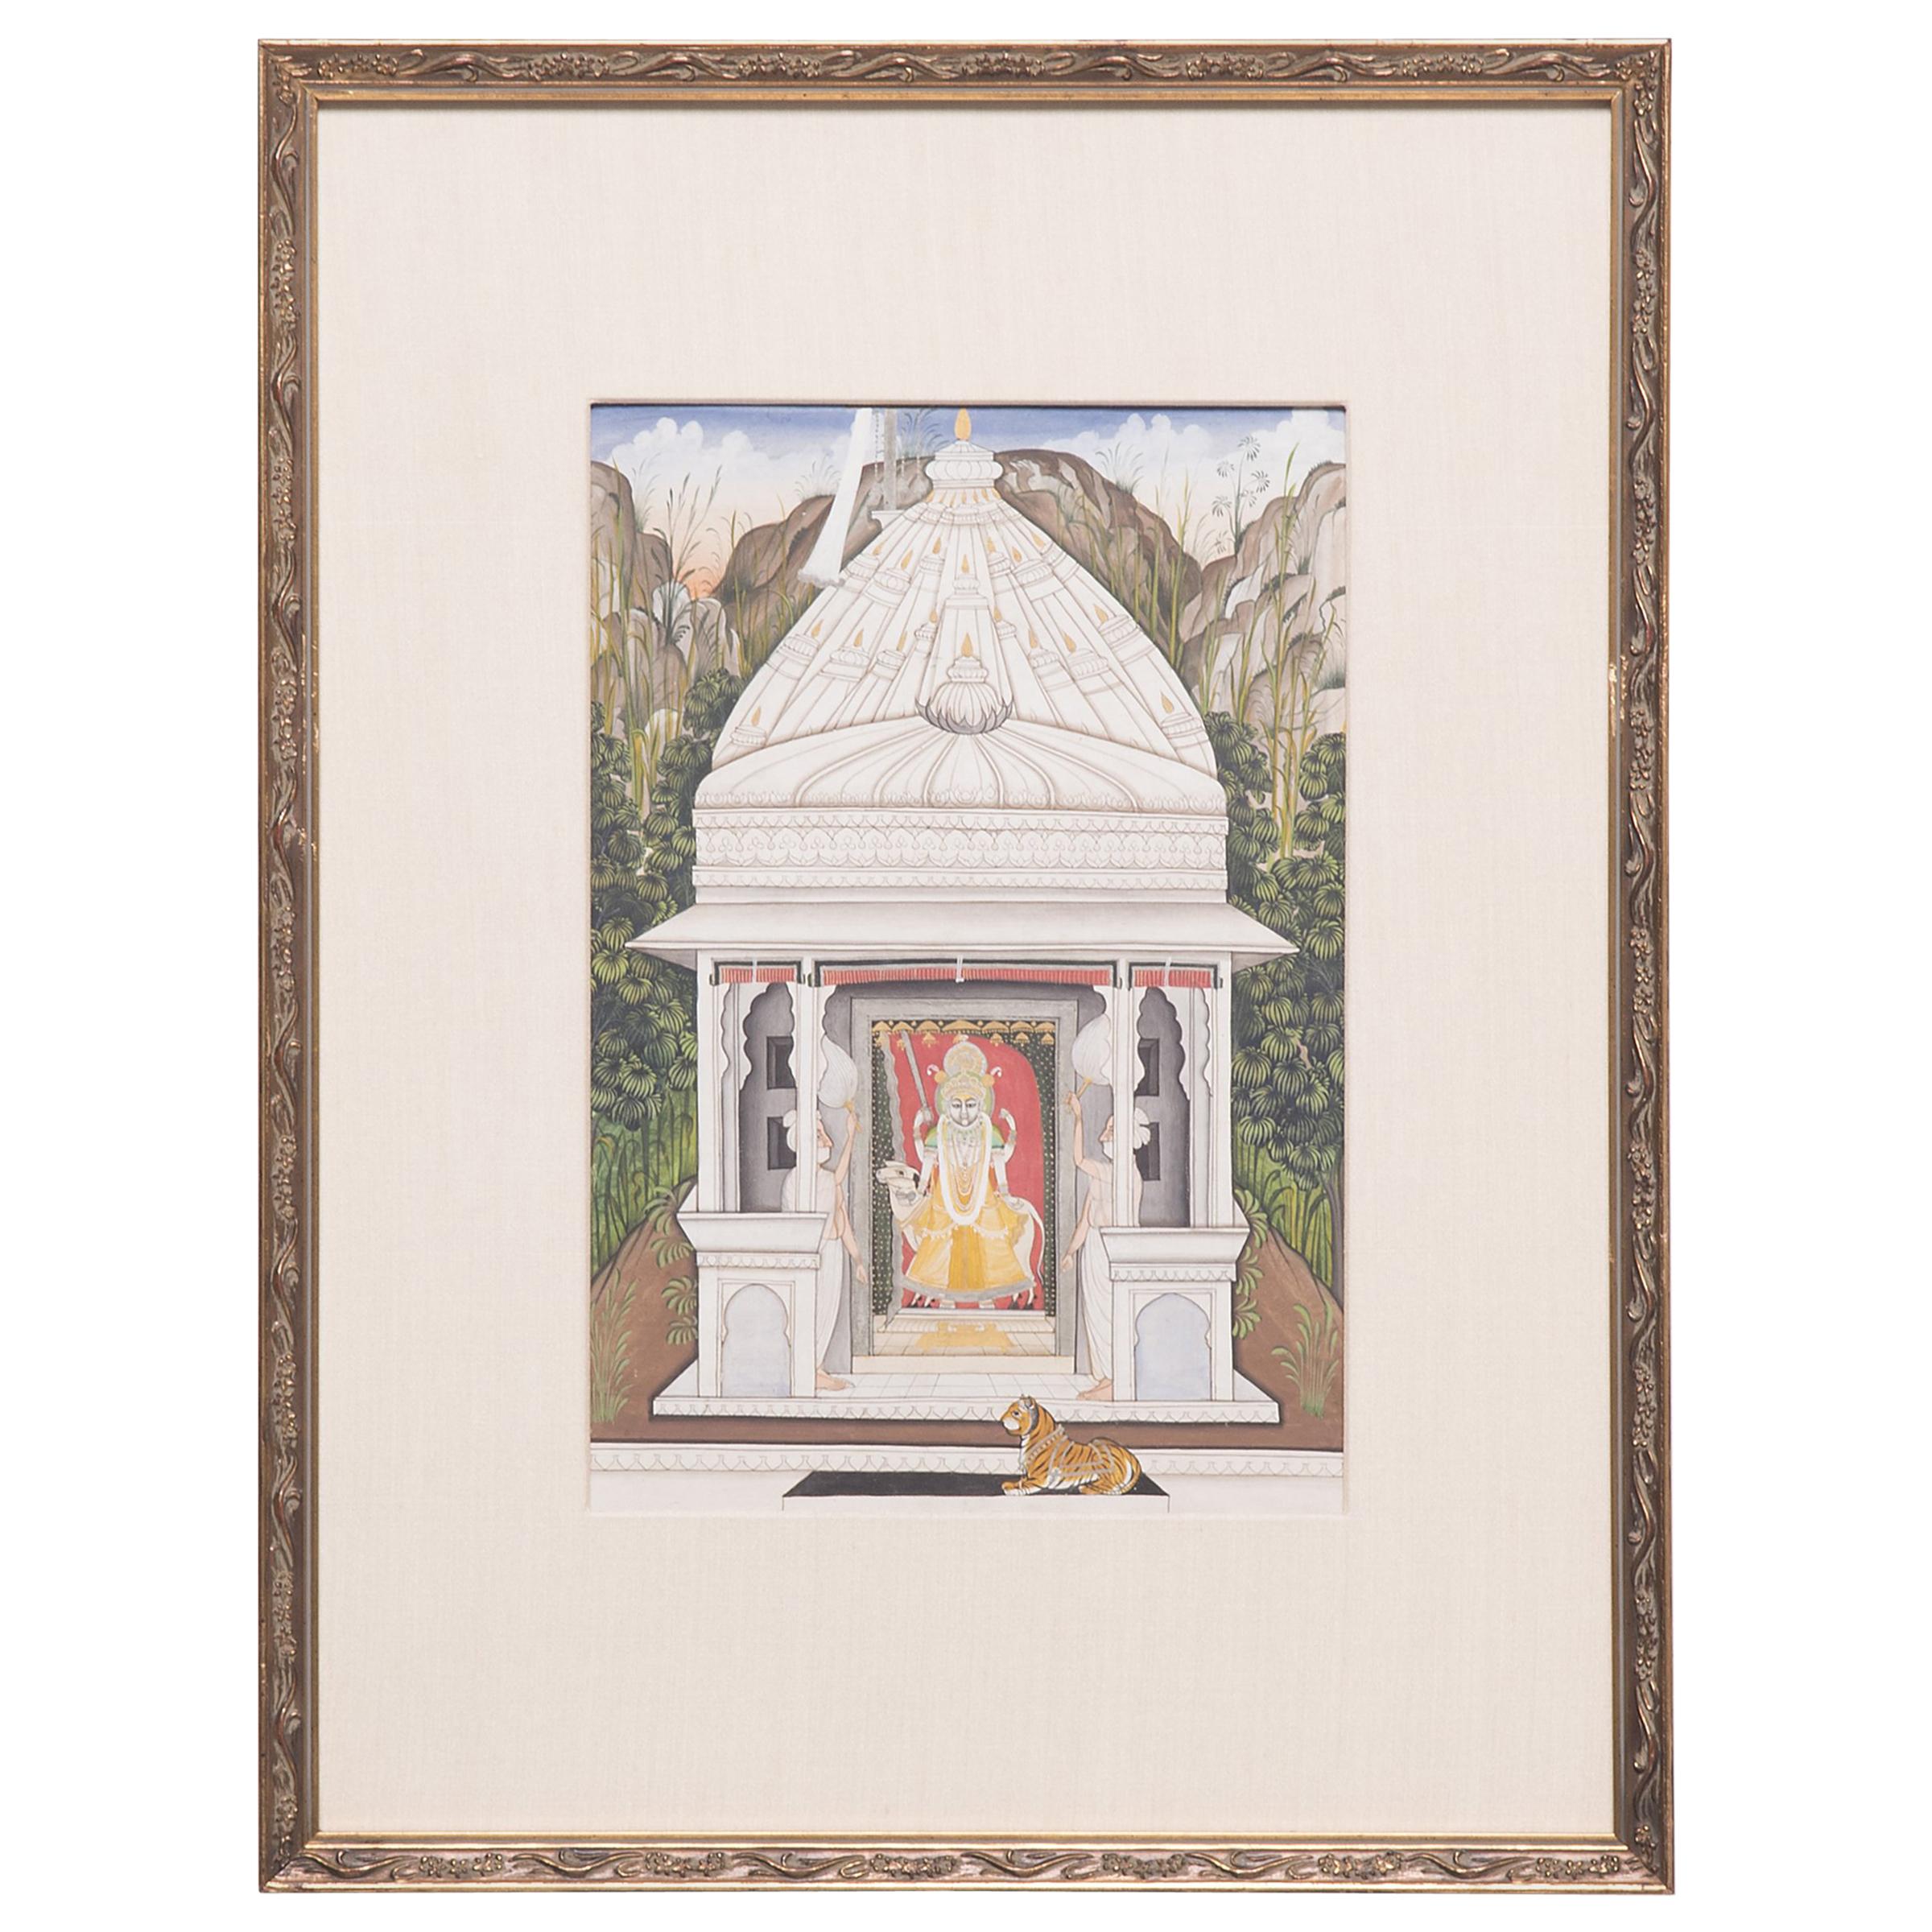 "Temple with Tiger" 19th Century Indian Mughal Miniature Painting